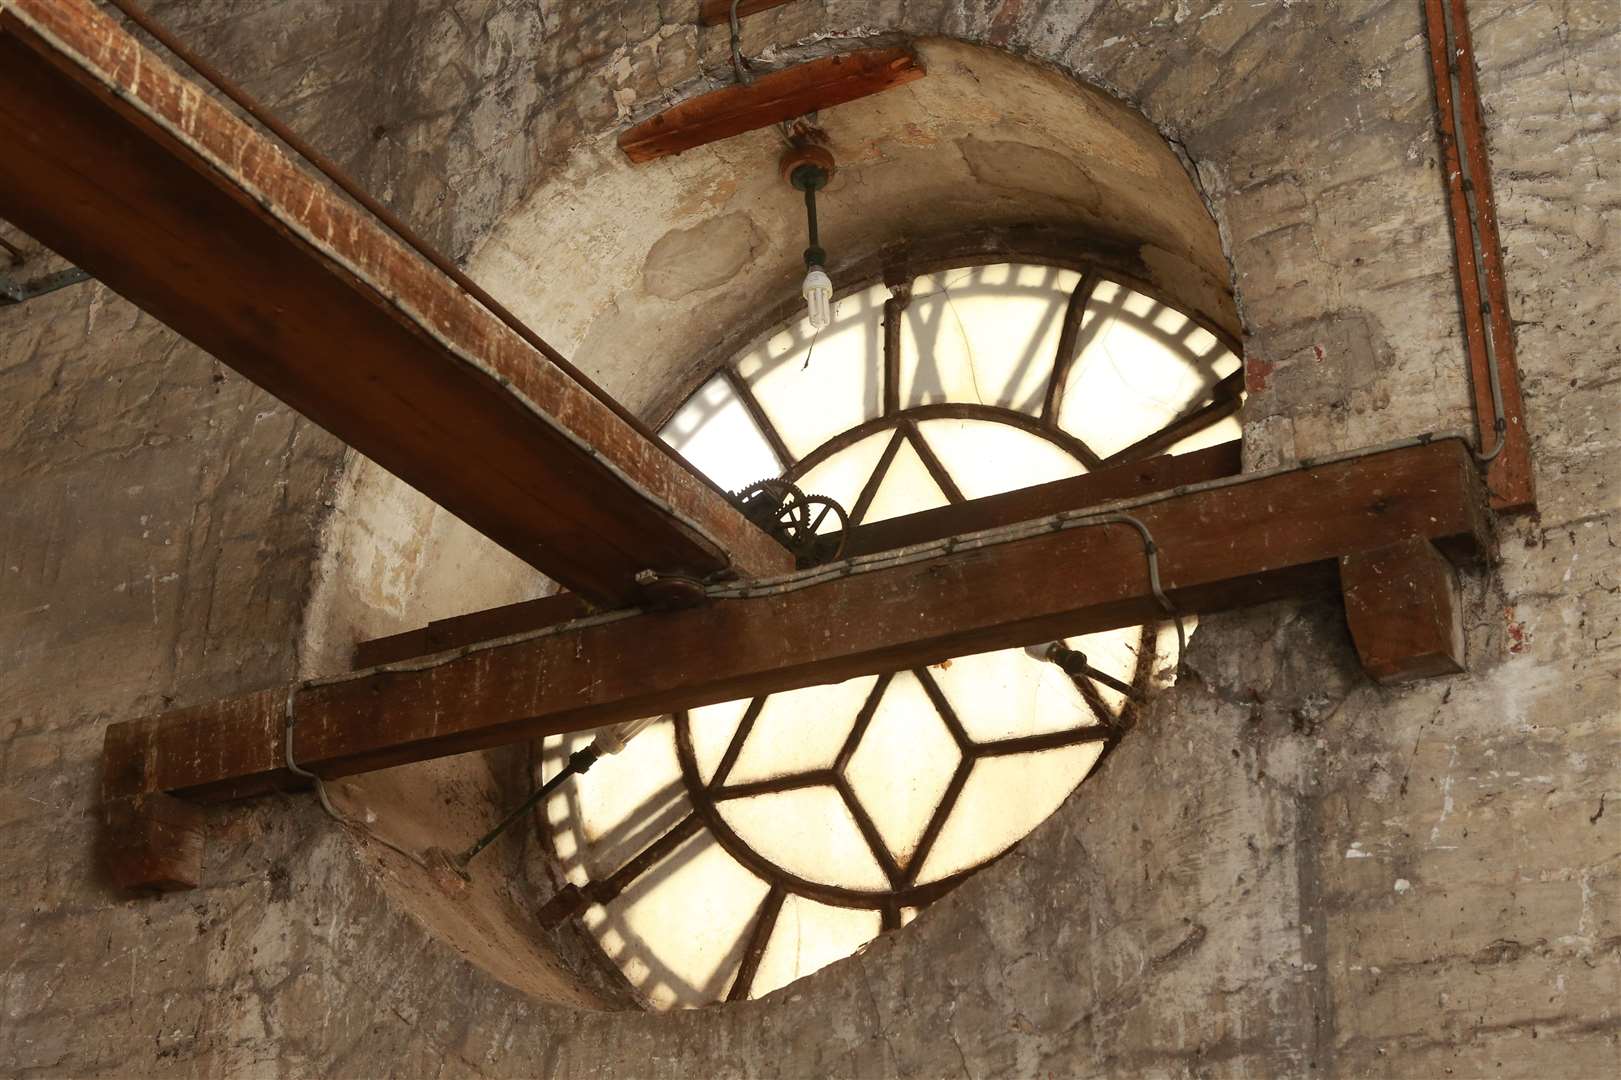 Inside the clock tower at Trinity Theatre, which is being turned into an exhibitions and heritage space